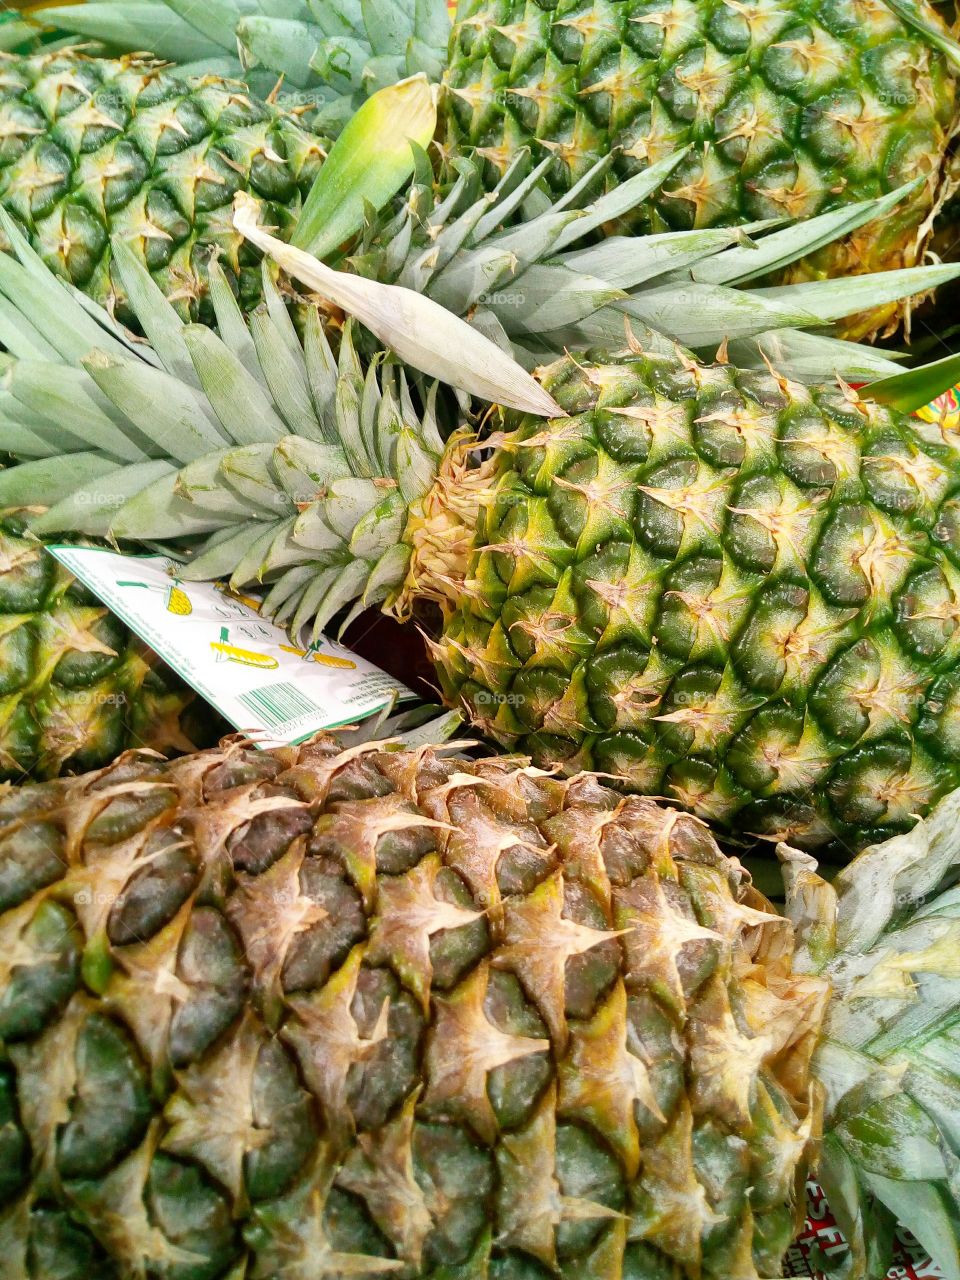 Picking out some Delicious Pineapples to make some Pineapple upside down cake.